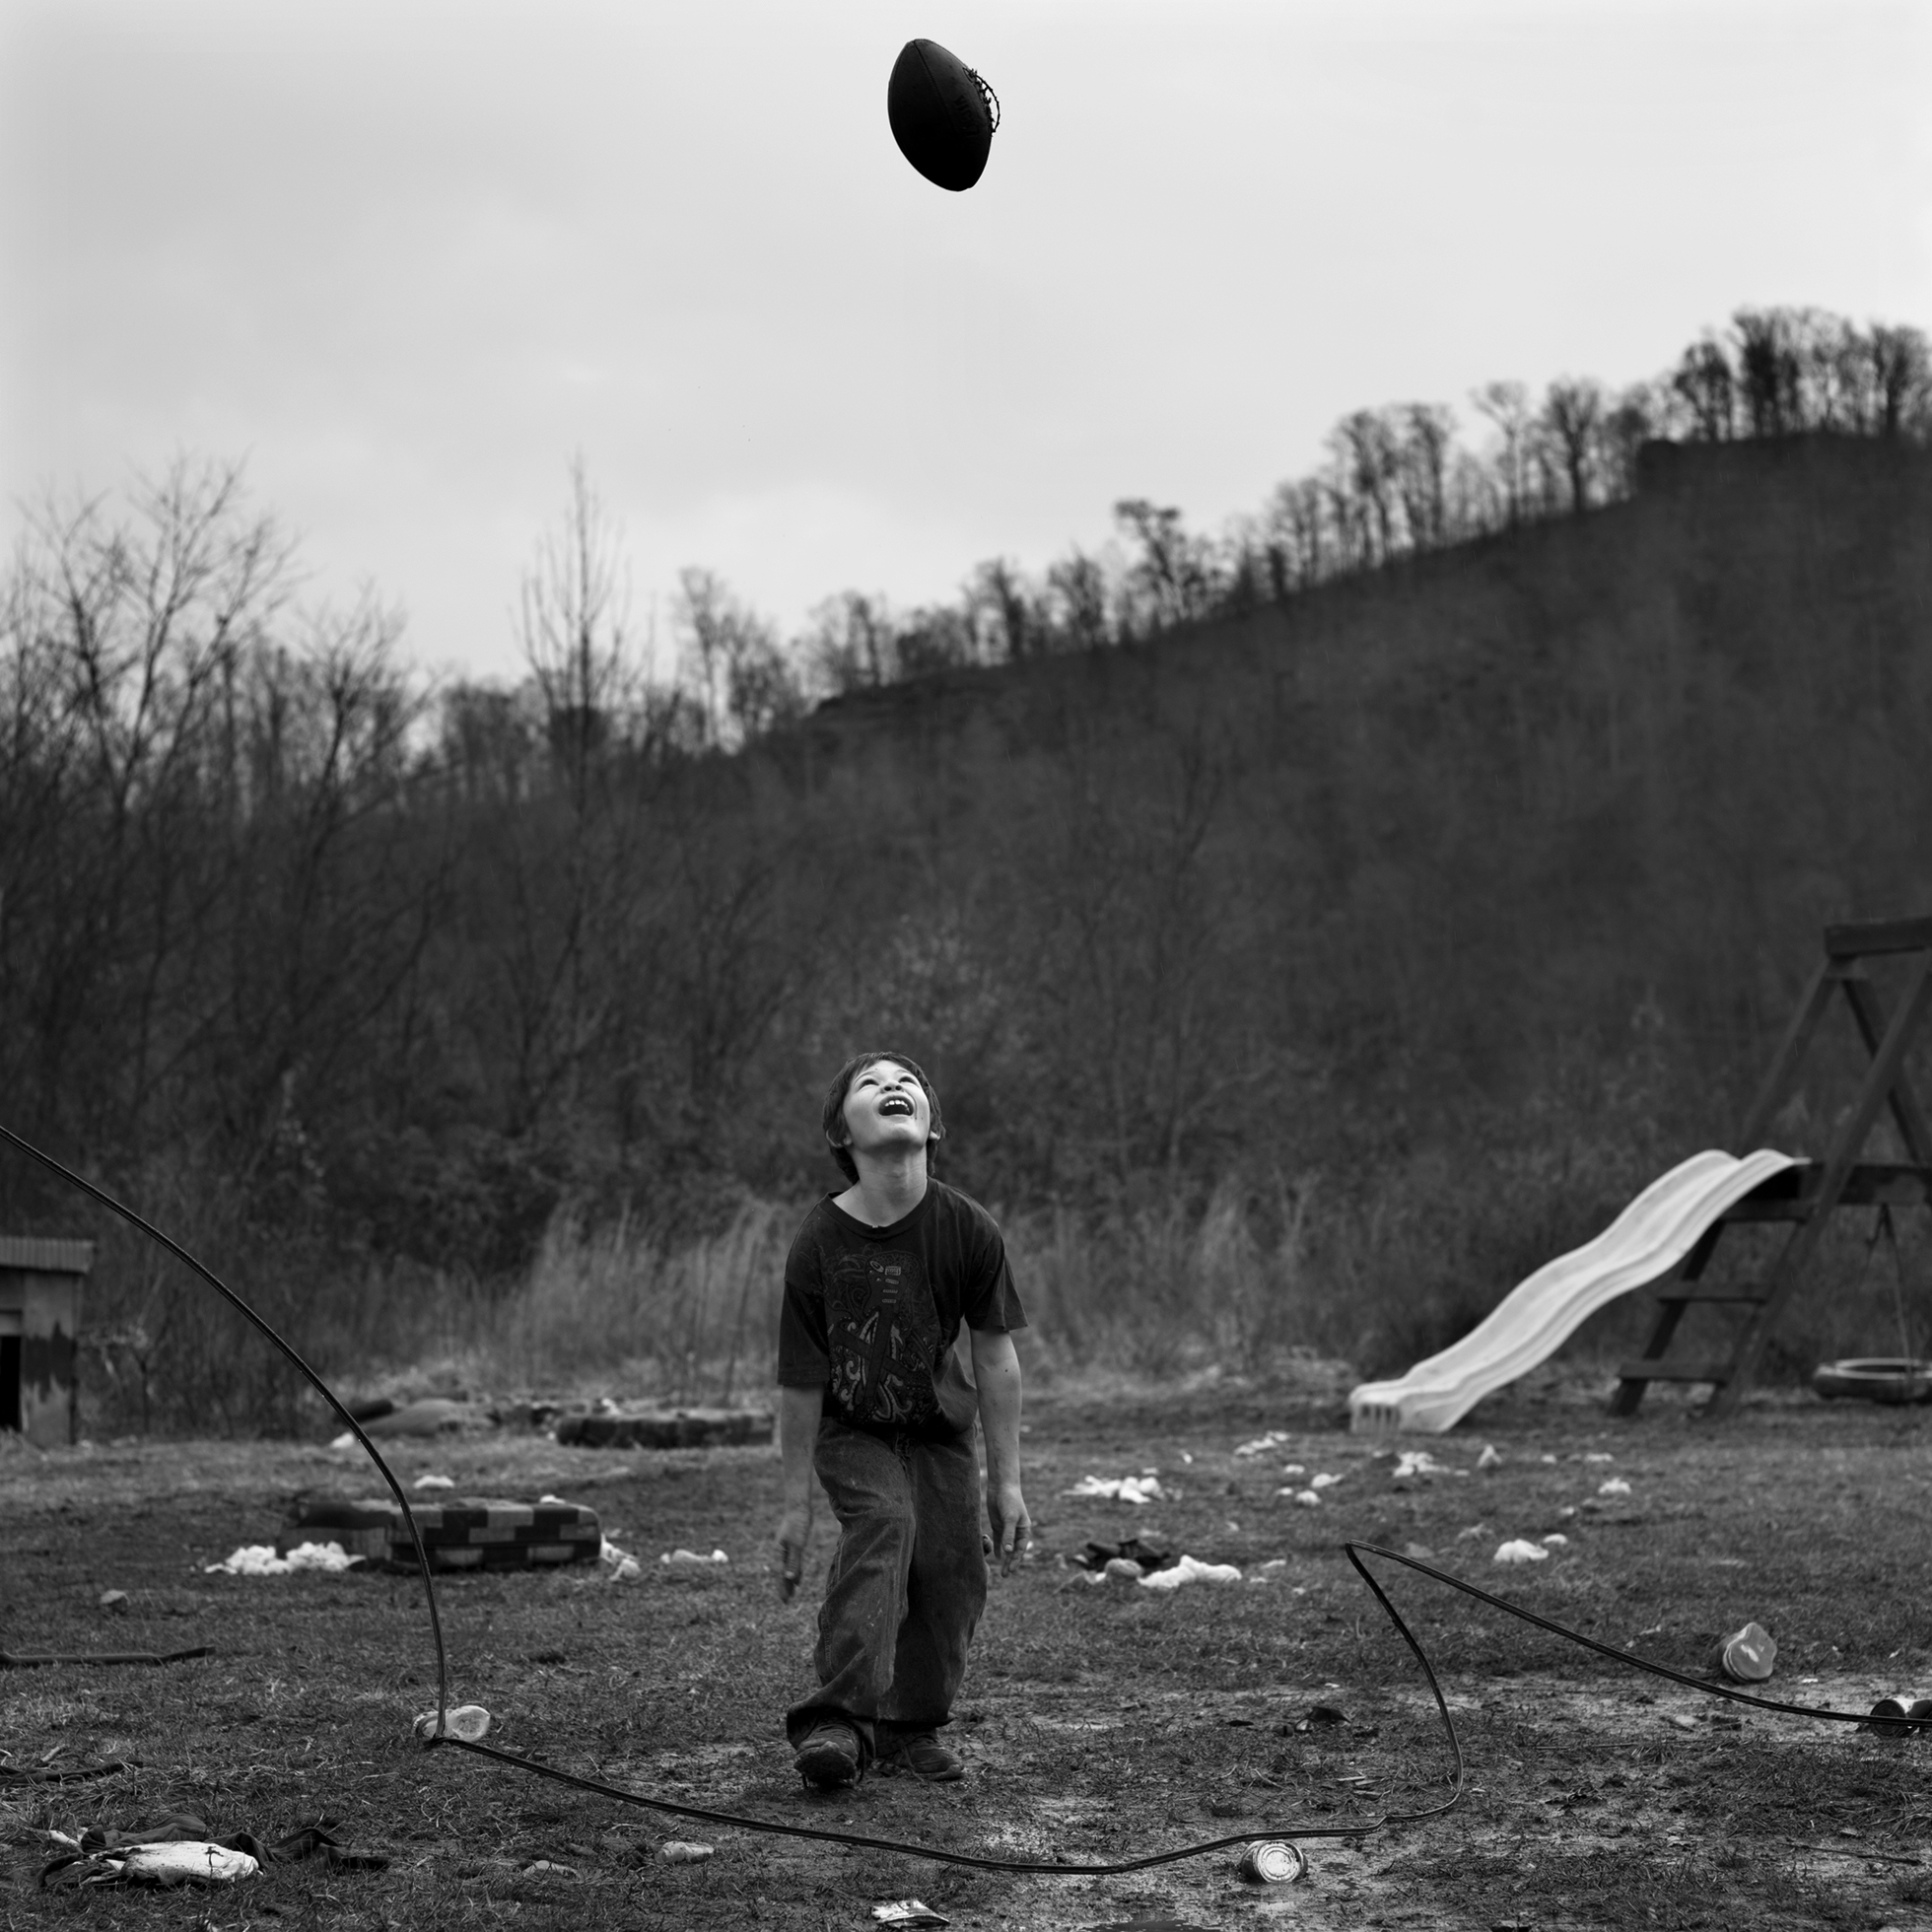 A boy looks up at a football with its laces coming apart in the air above him as he stands in a trash-filled yard with a slide and a tire swing to the right. The yard is in front of a hill with bare-branched trees.